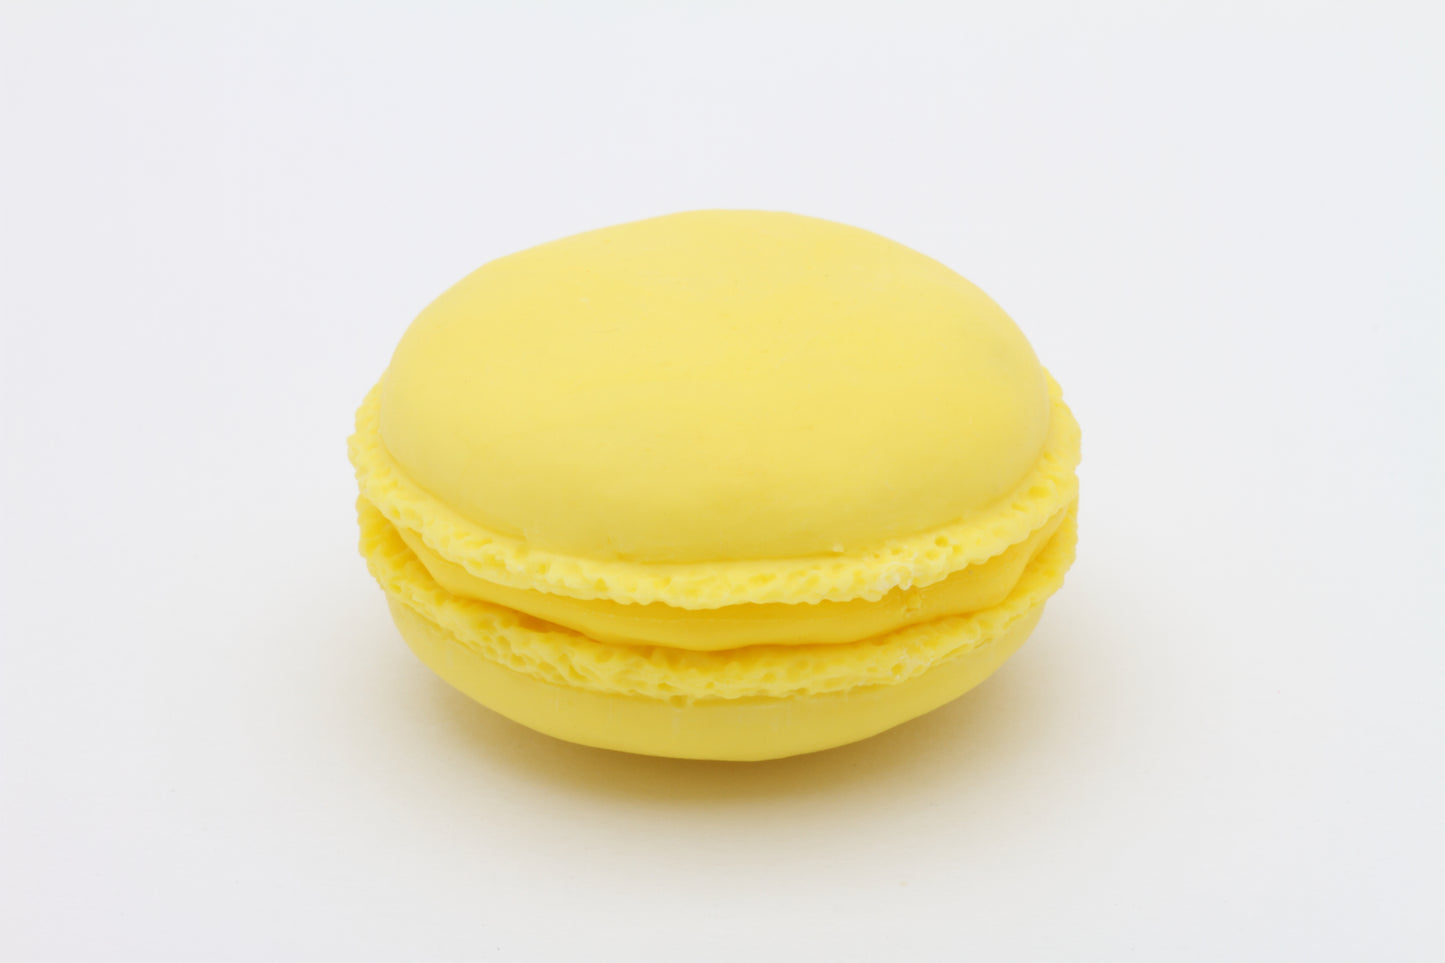 X 38012 FRENCH PASTRY erasers-DISCONTINUED